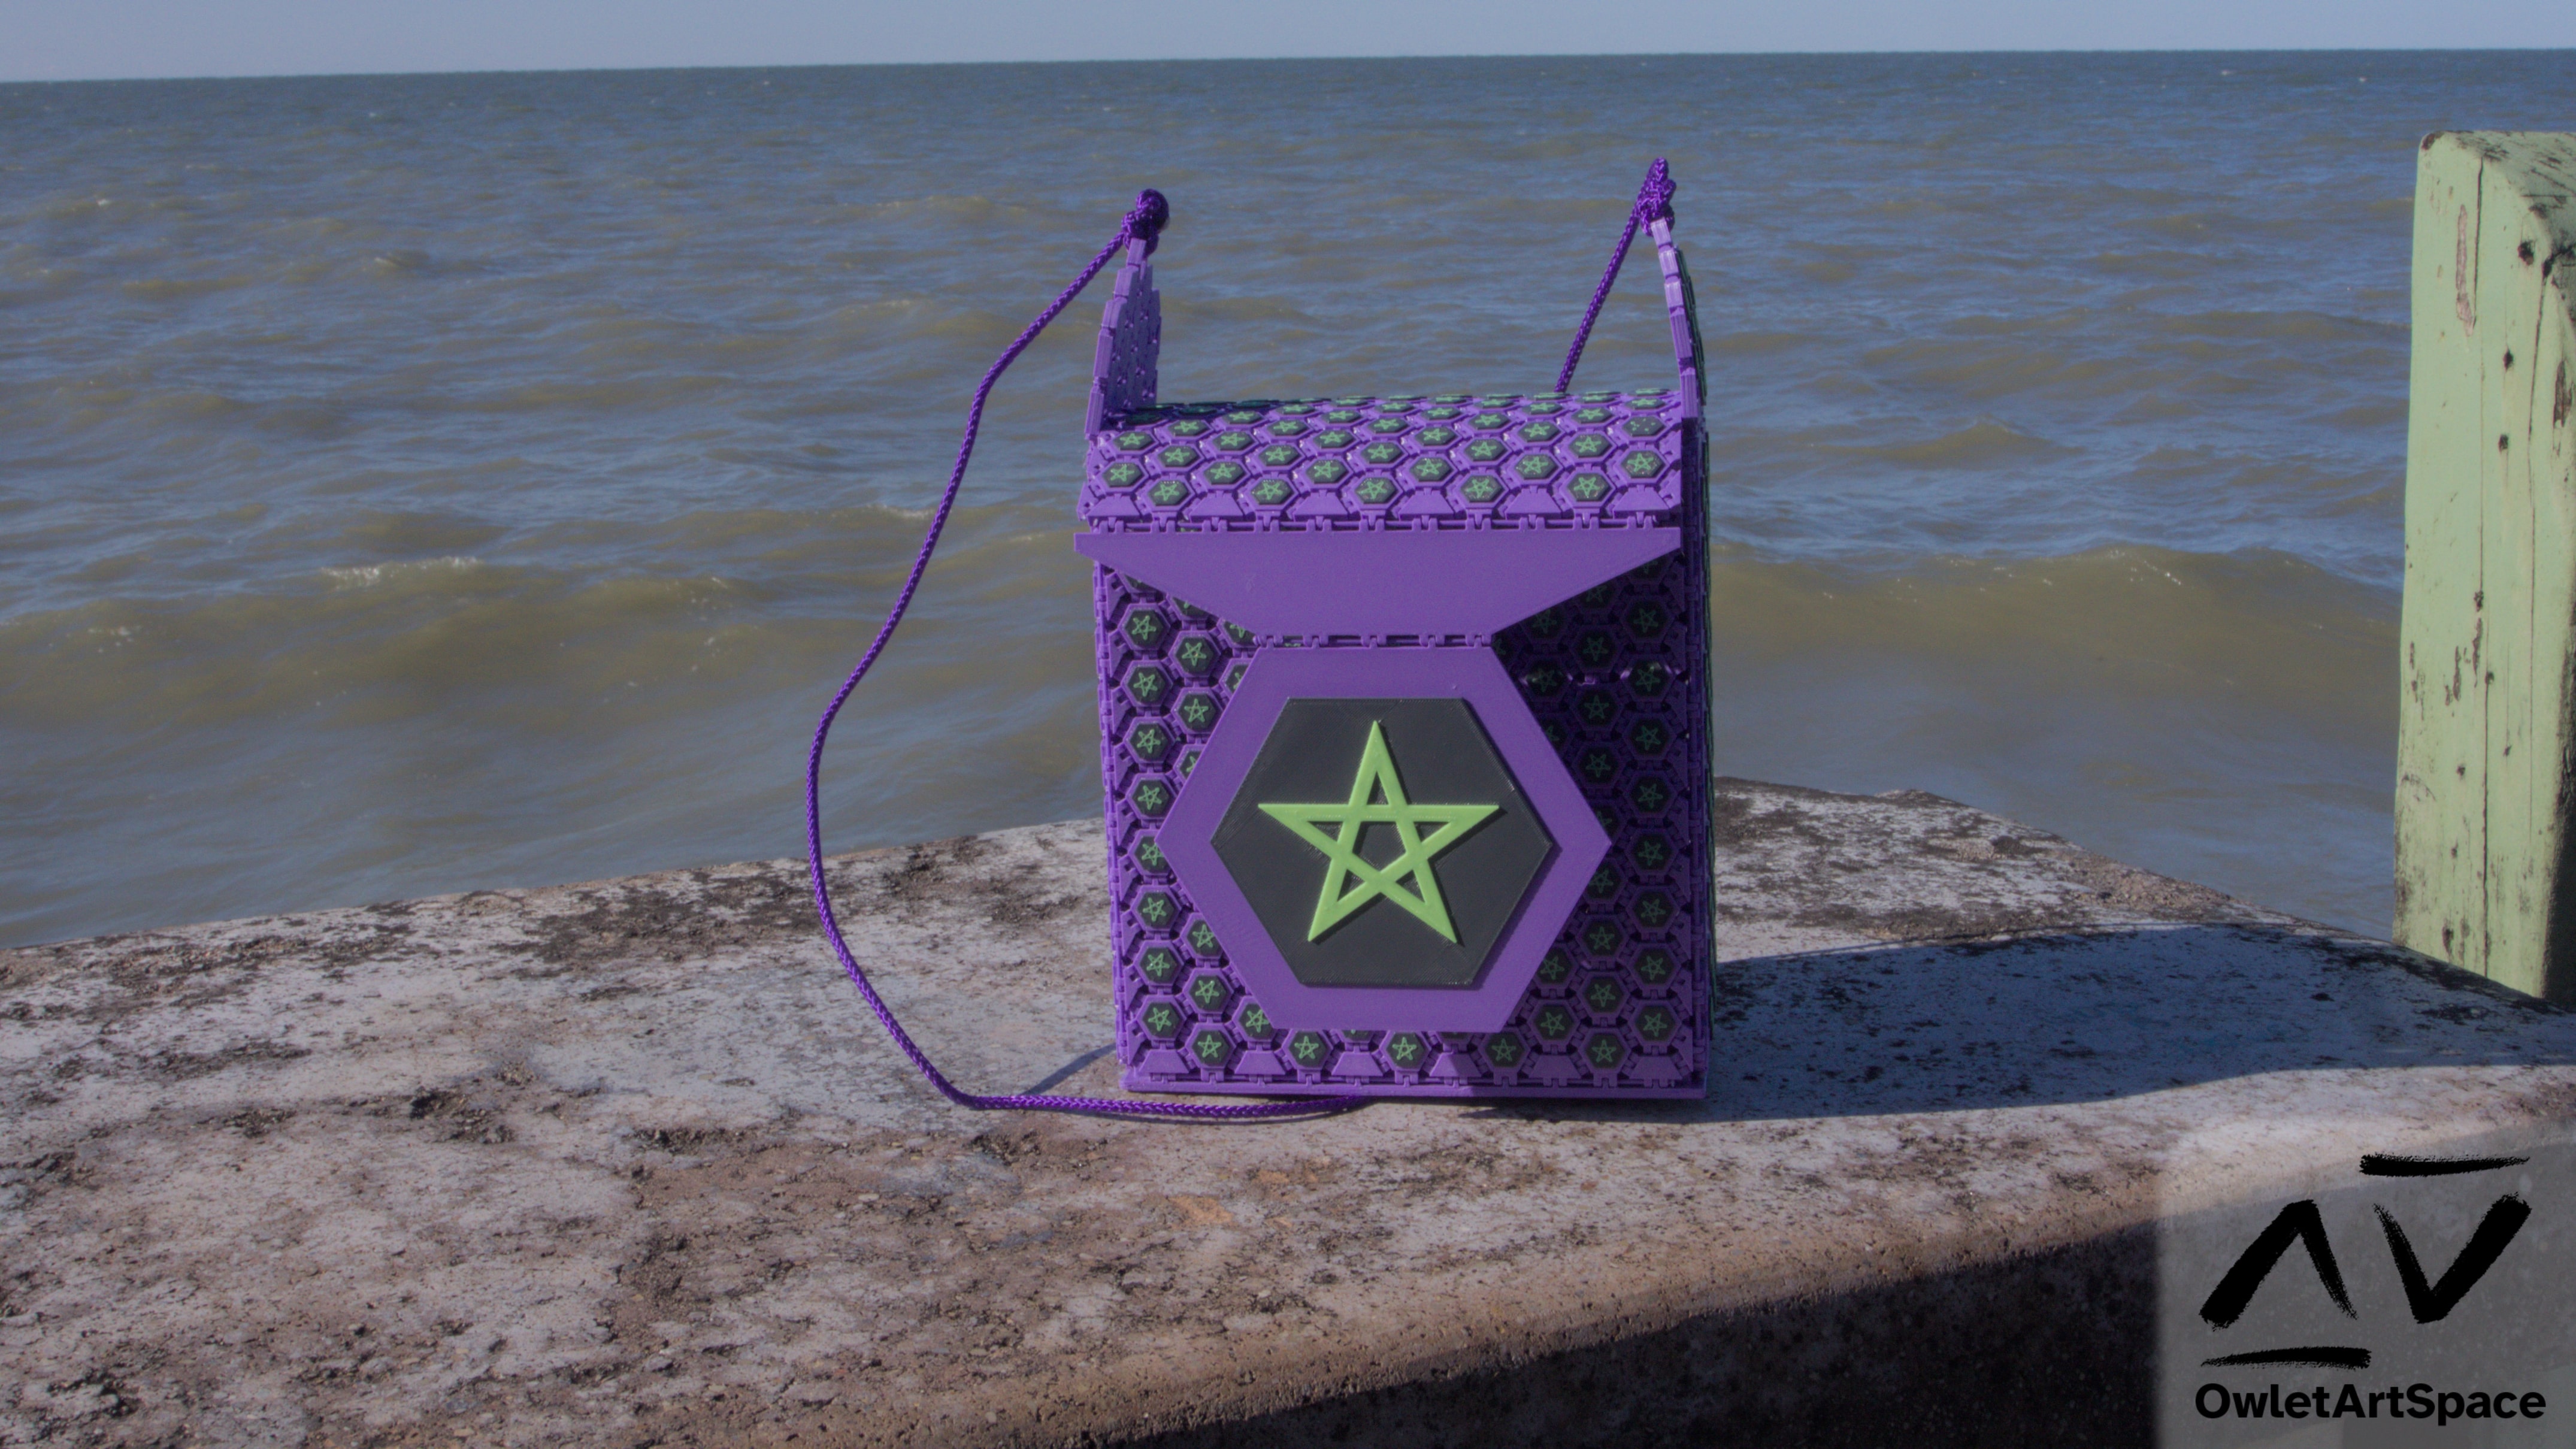 A purple purse made up of hexagonal pieces. The pieces have a smaller hexagon in gray with a yellow star in the center. The center flap is one of those segments made a lot larger. In the background, a lake.